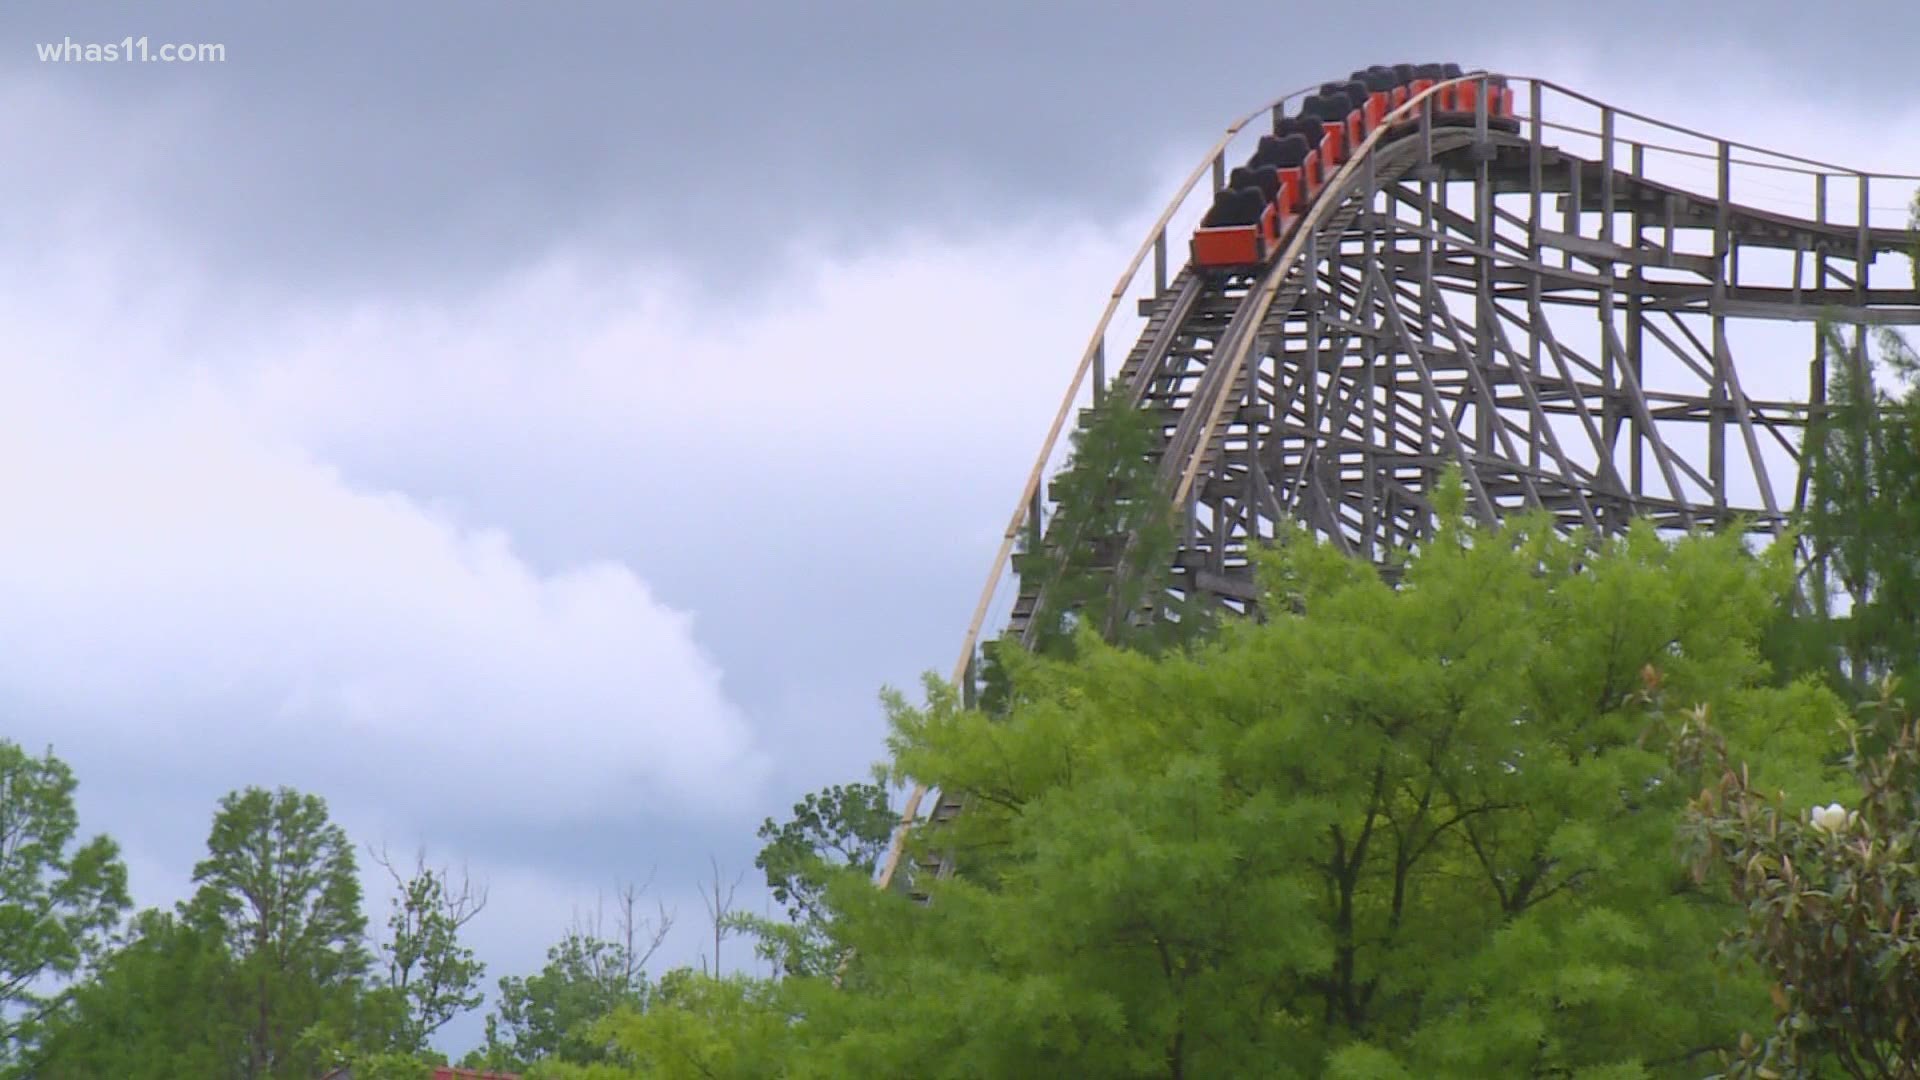 Summer plans may be changing for some families after Kentucky Kingdom announces today that chaperone's are needed for anyone 15 years old and younger.